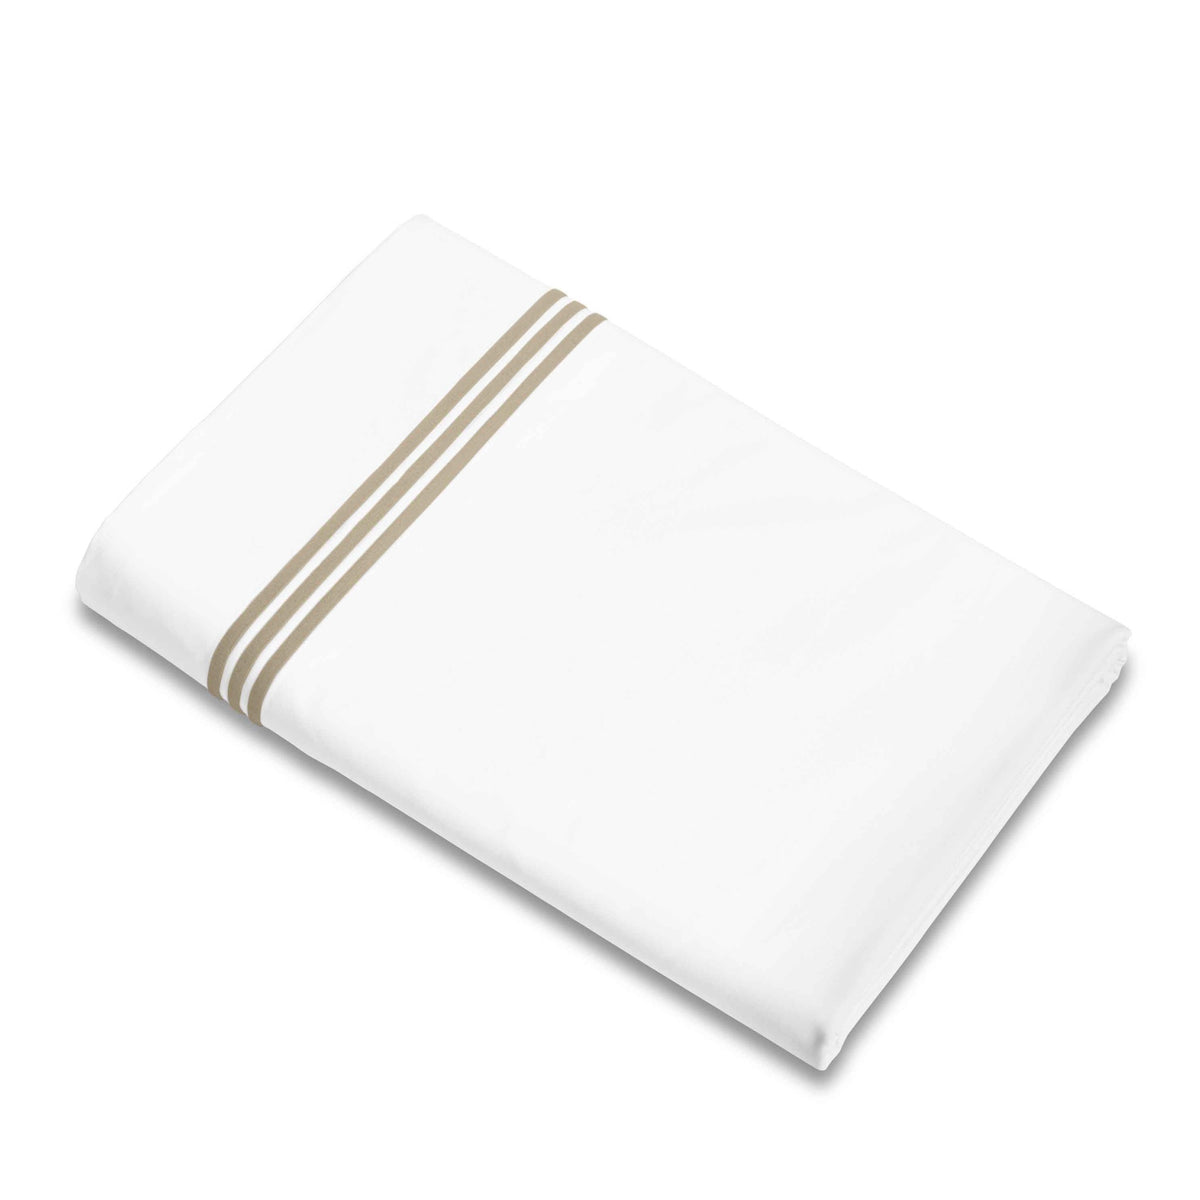 Flat Sheet of Signoria Platinum Percale Bedding in White/Taupe Color